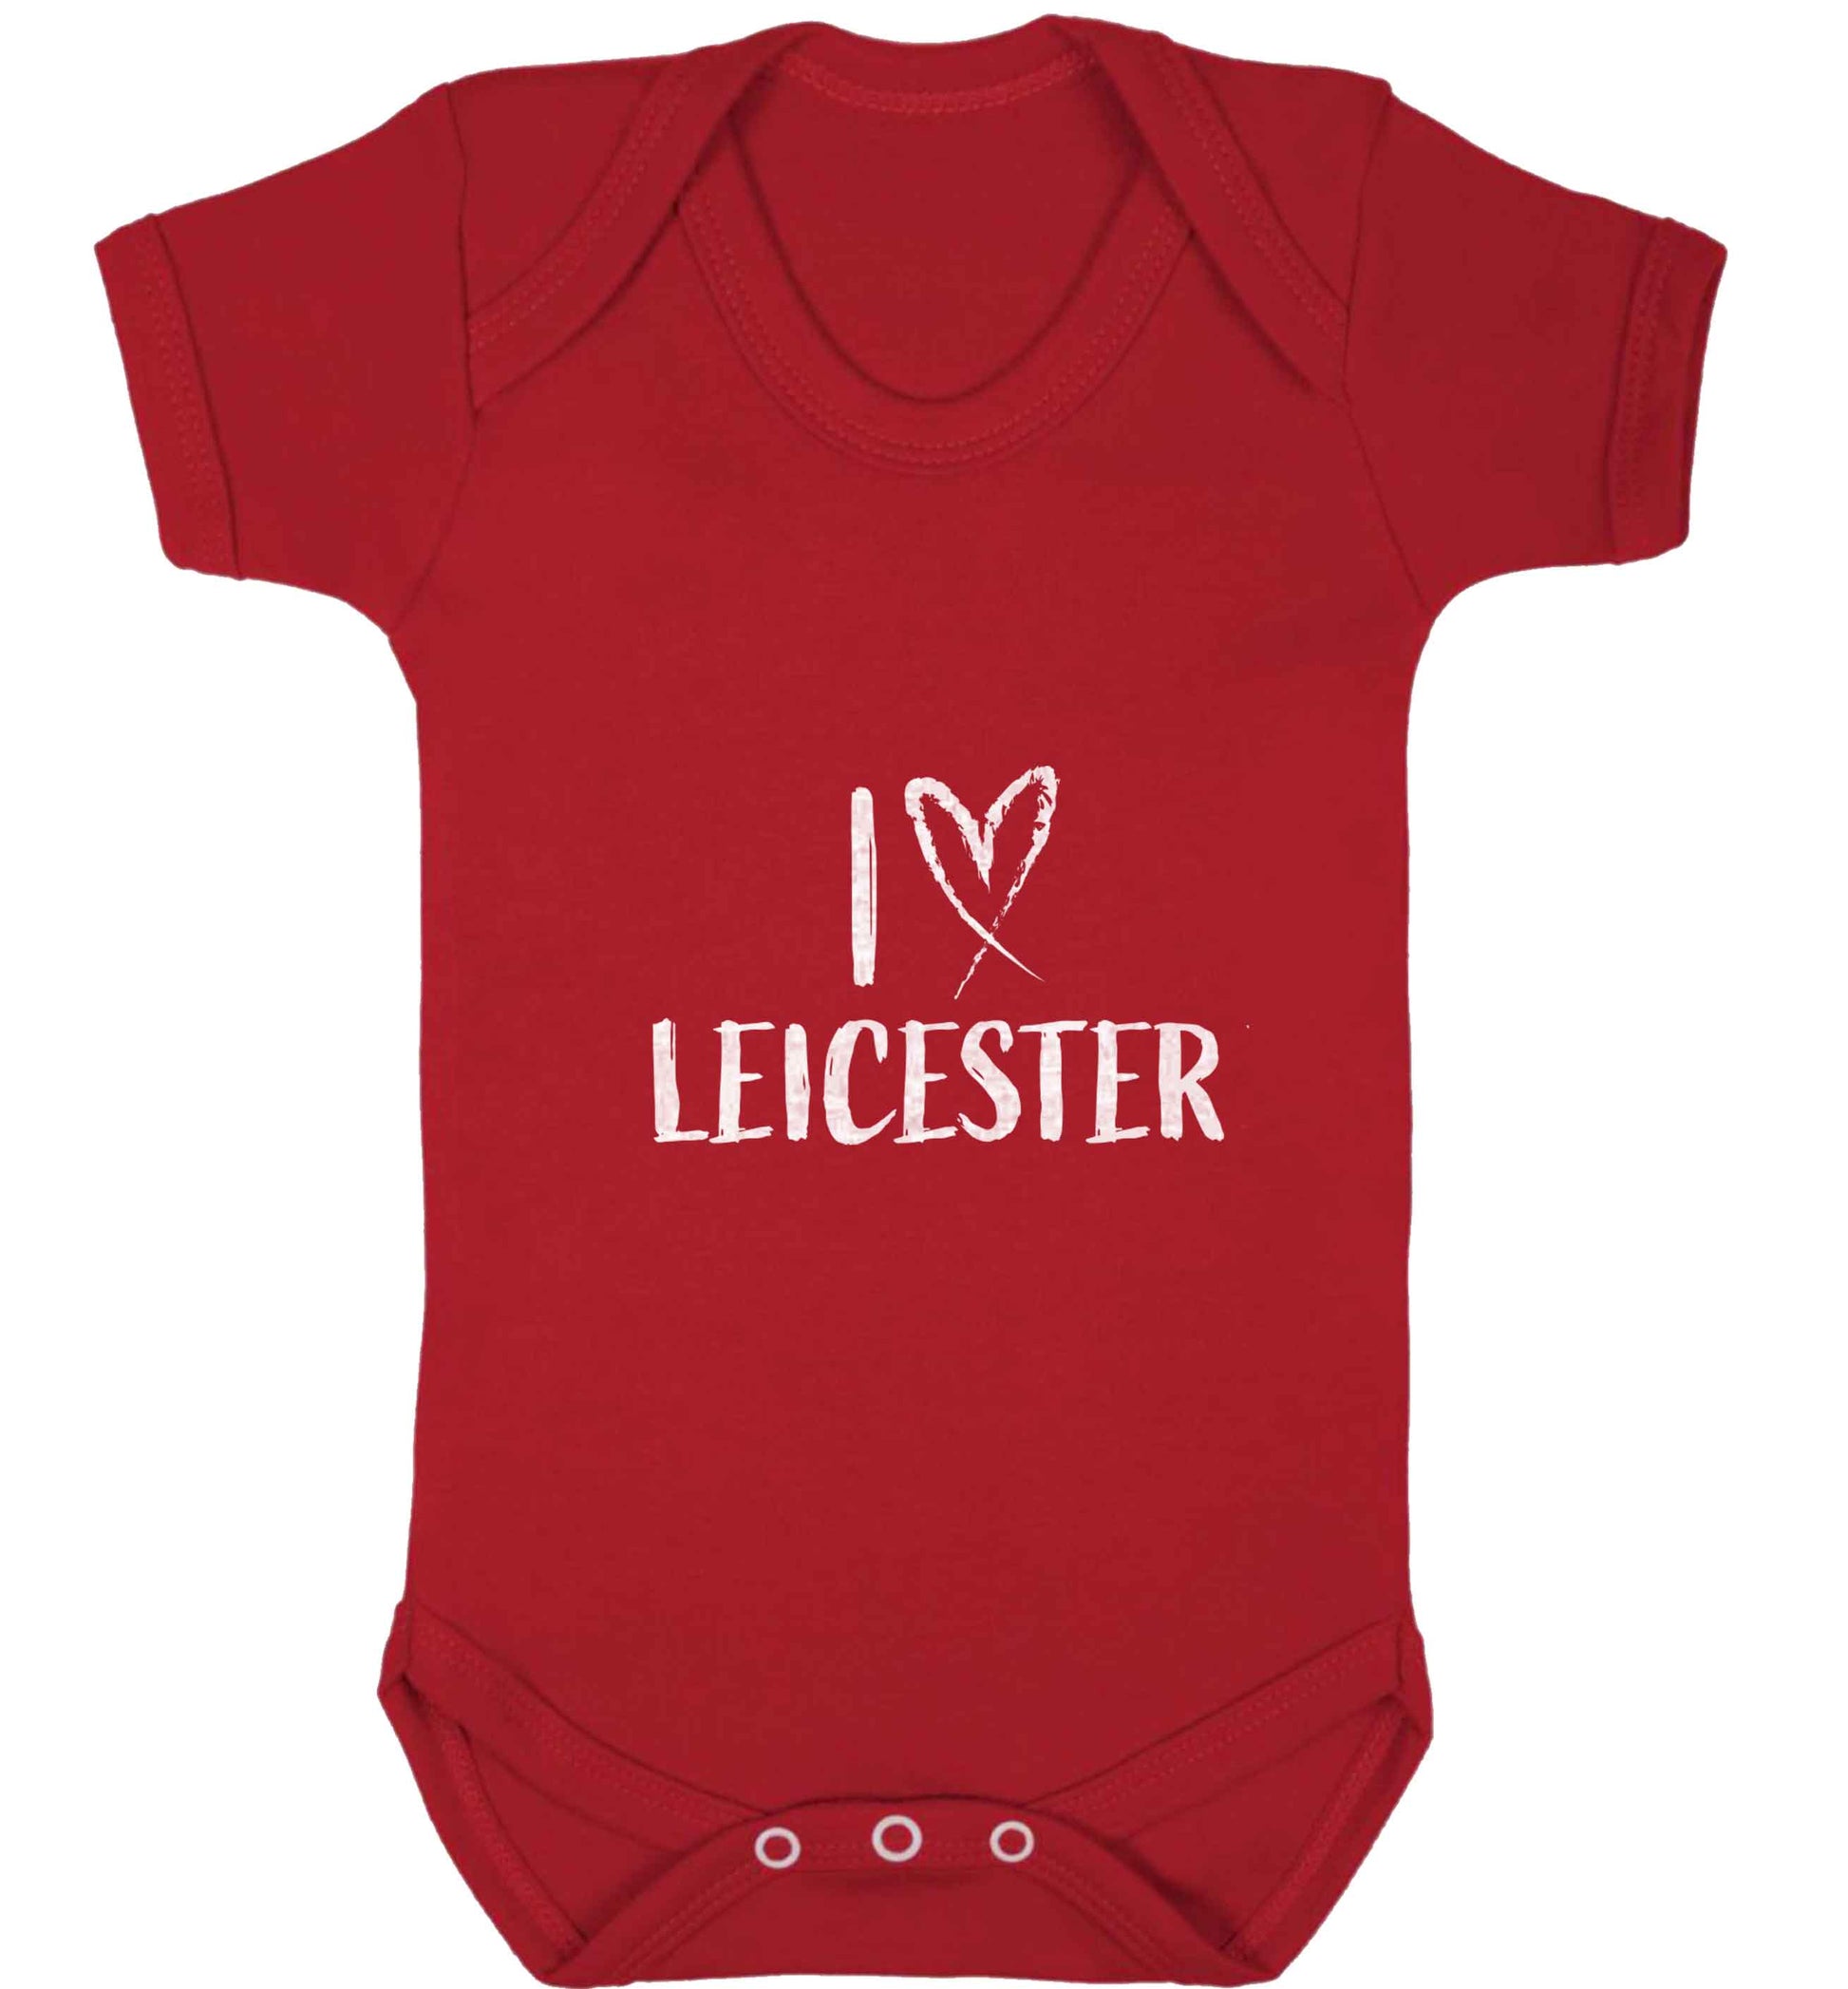 I love Leicester baby vest red 18-24 months